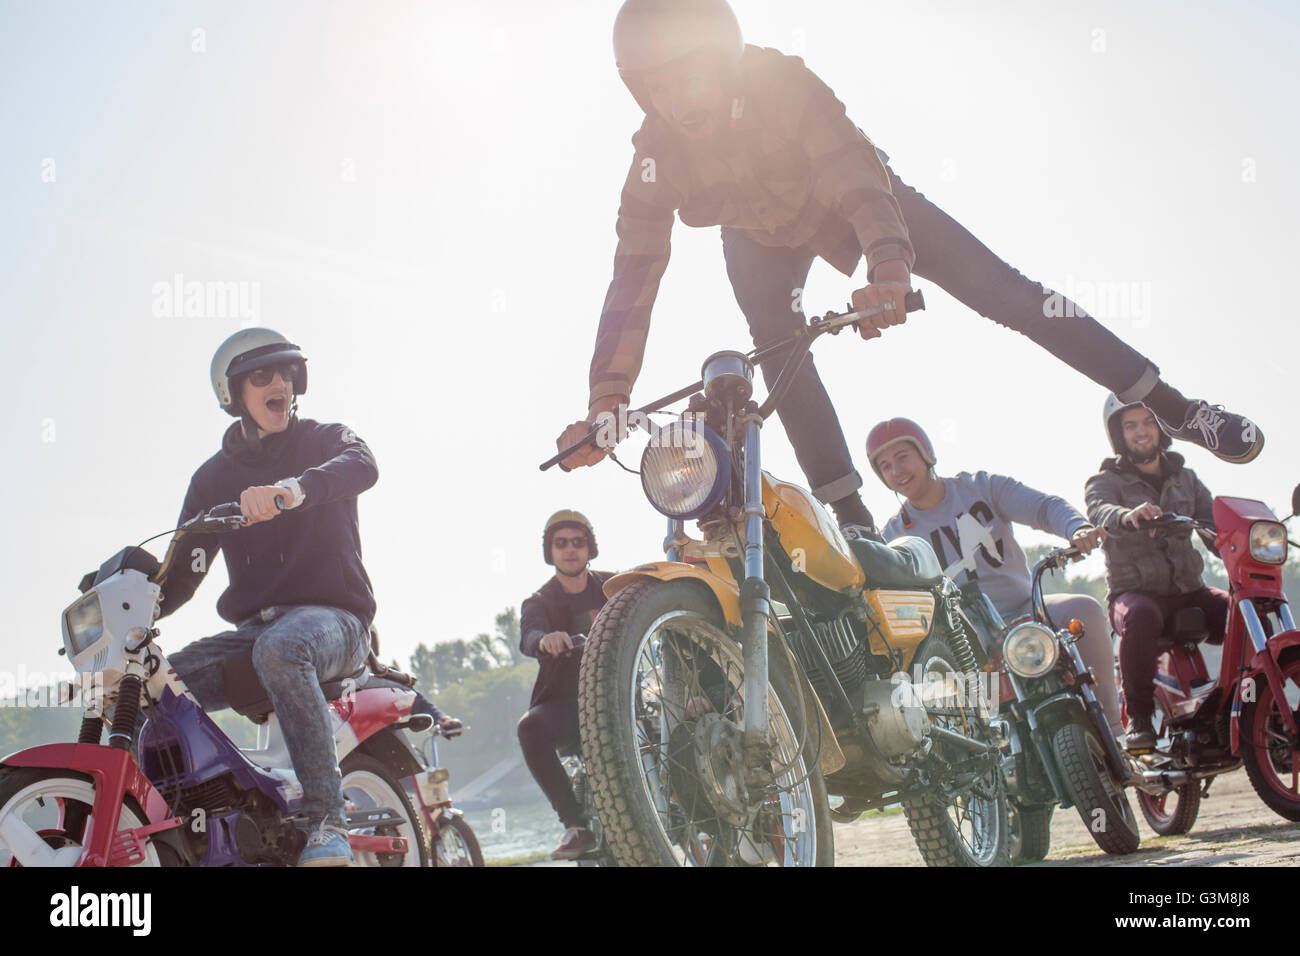 Group of friends riding mopeds along road, man in mid air, doing stunt Stock Photo